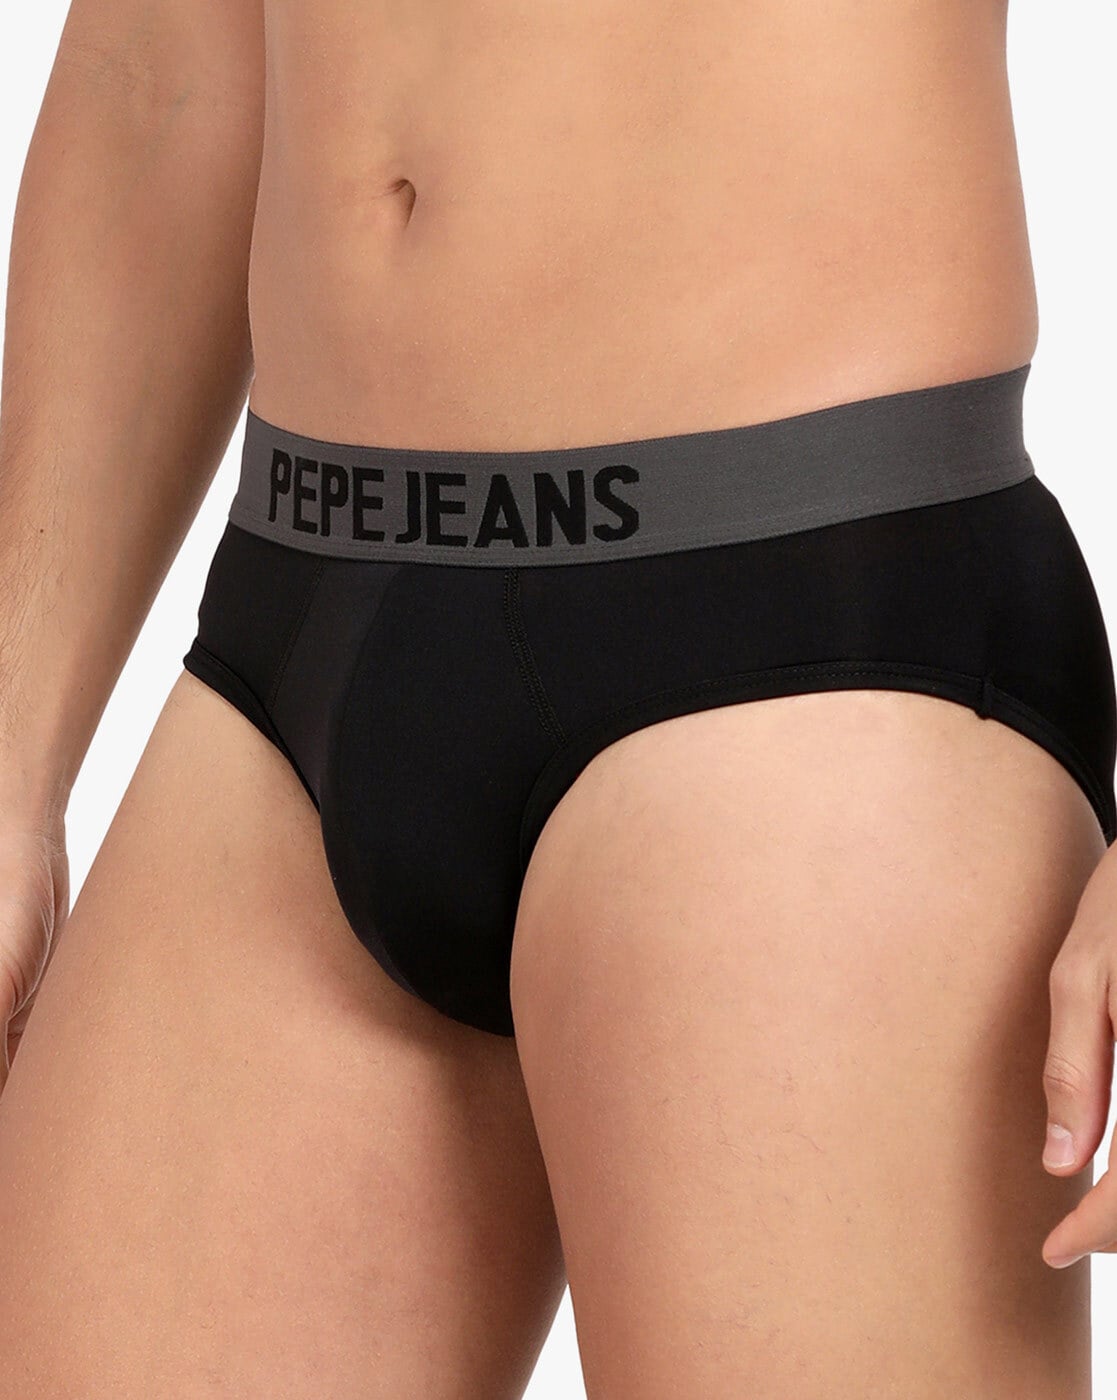 Buy Black Briefs for Men by Pepe Jeans Online